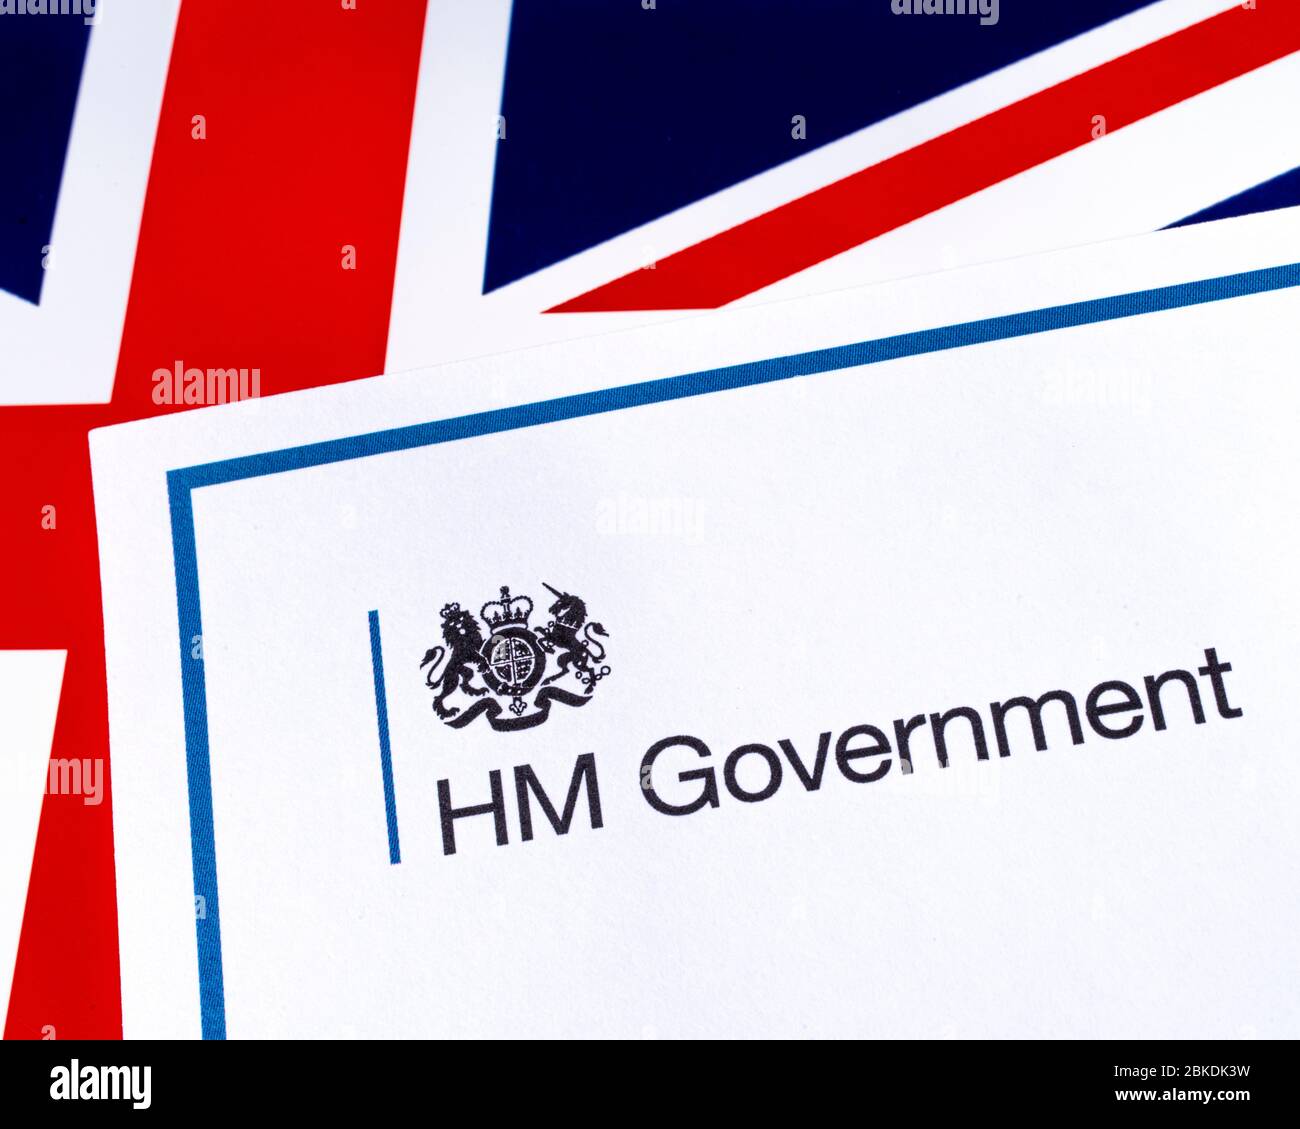 London, UK - April 20th 2020: HM Government heading with a UK flag background. Stock Photo